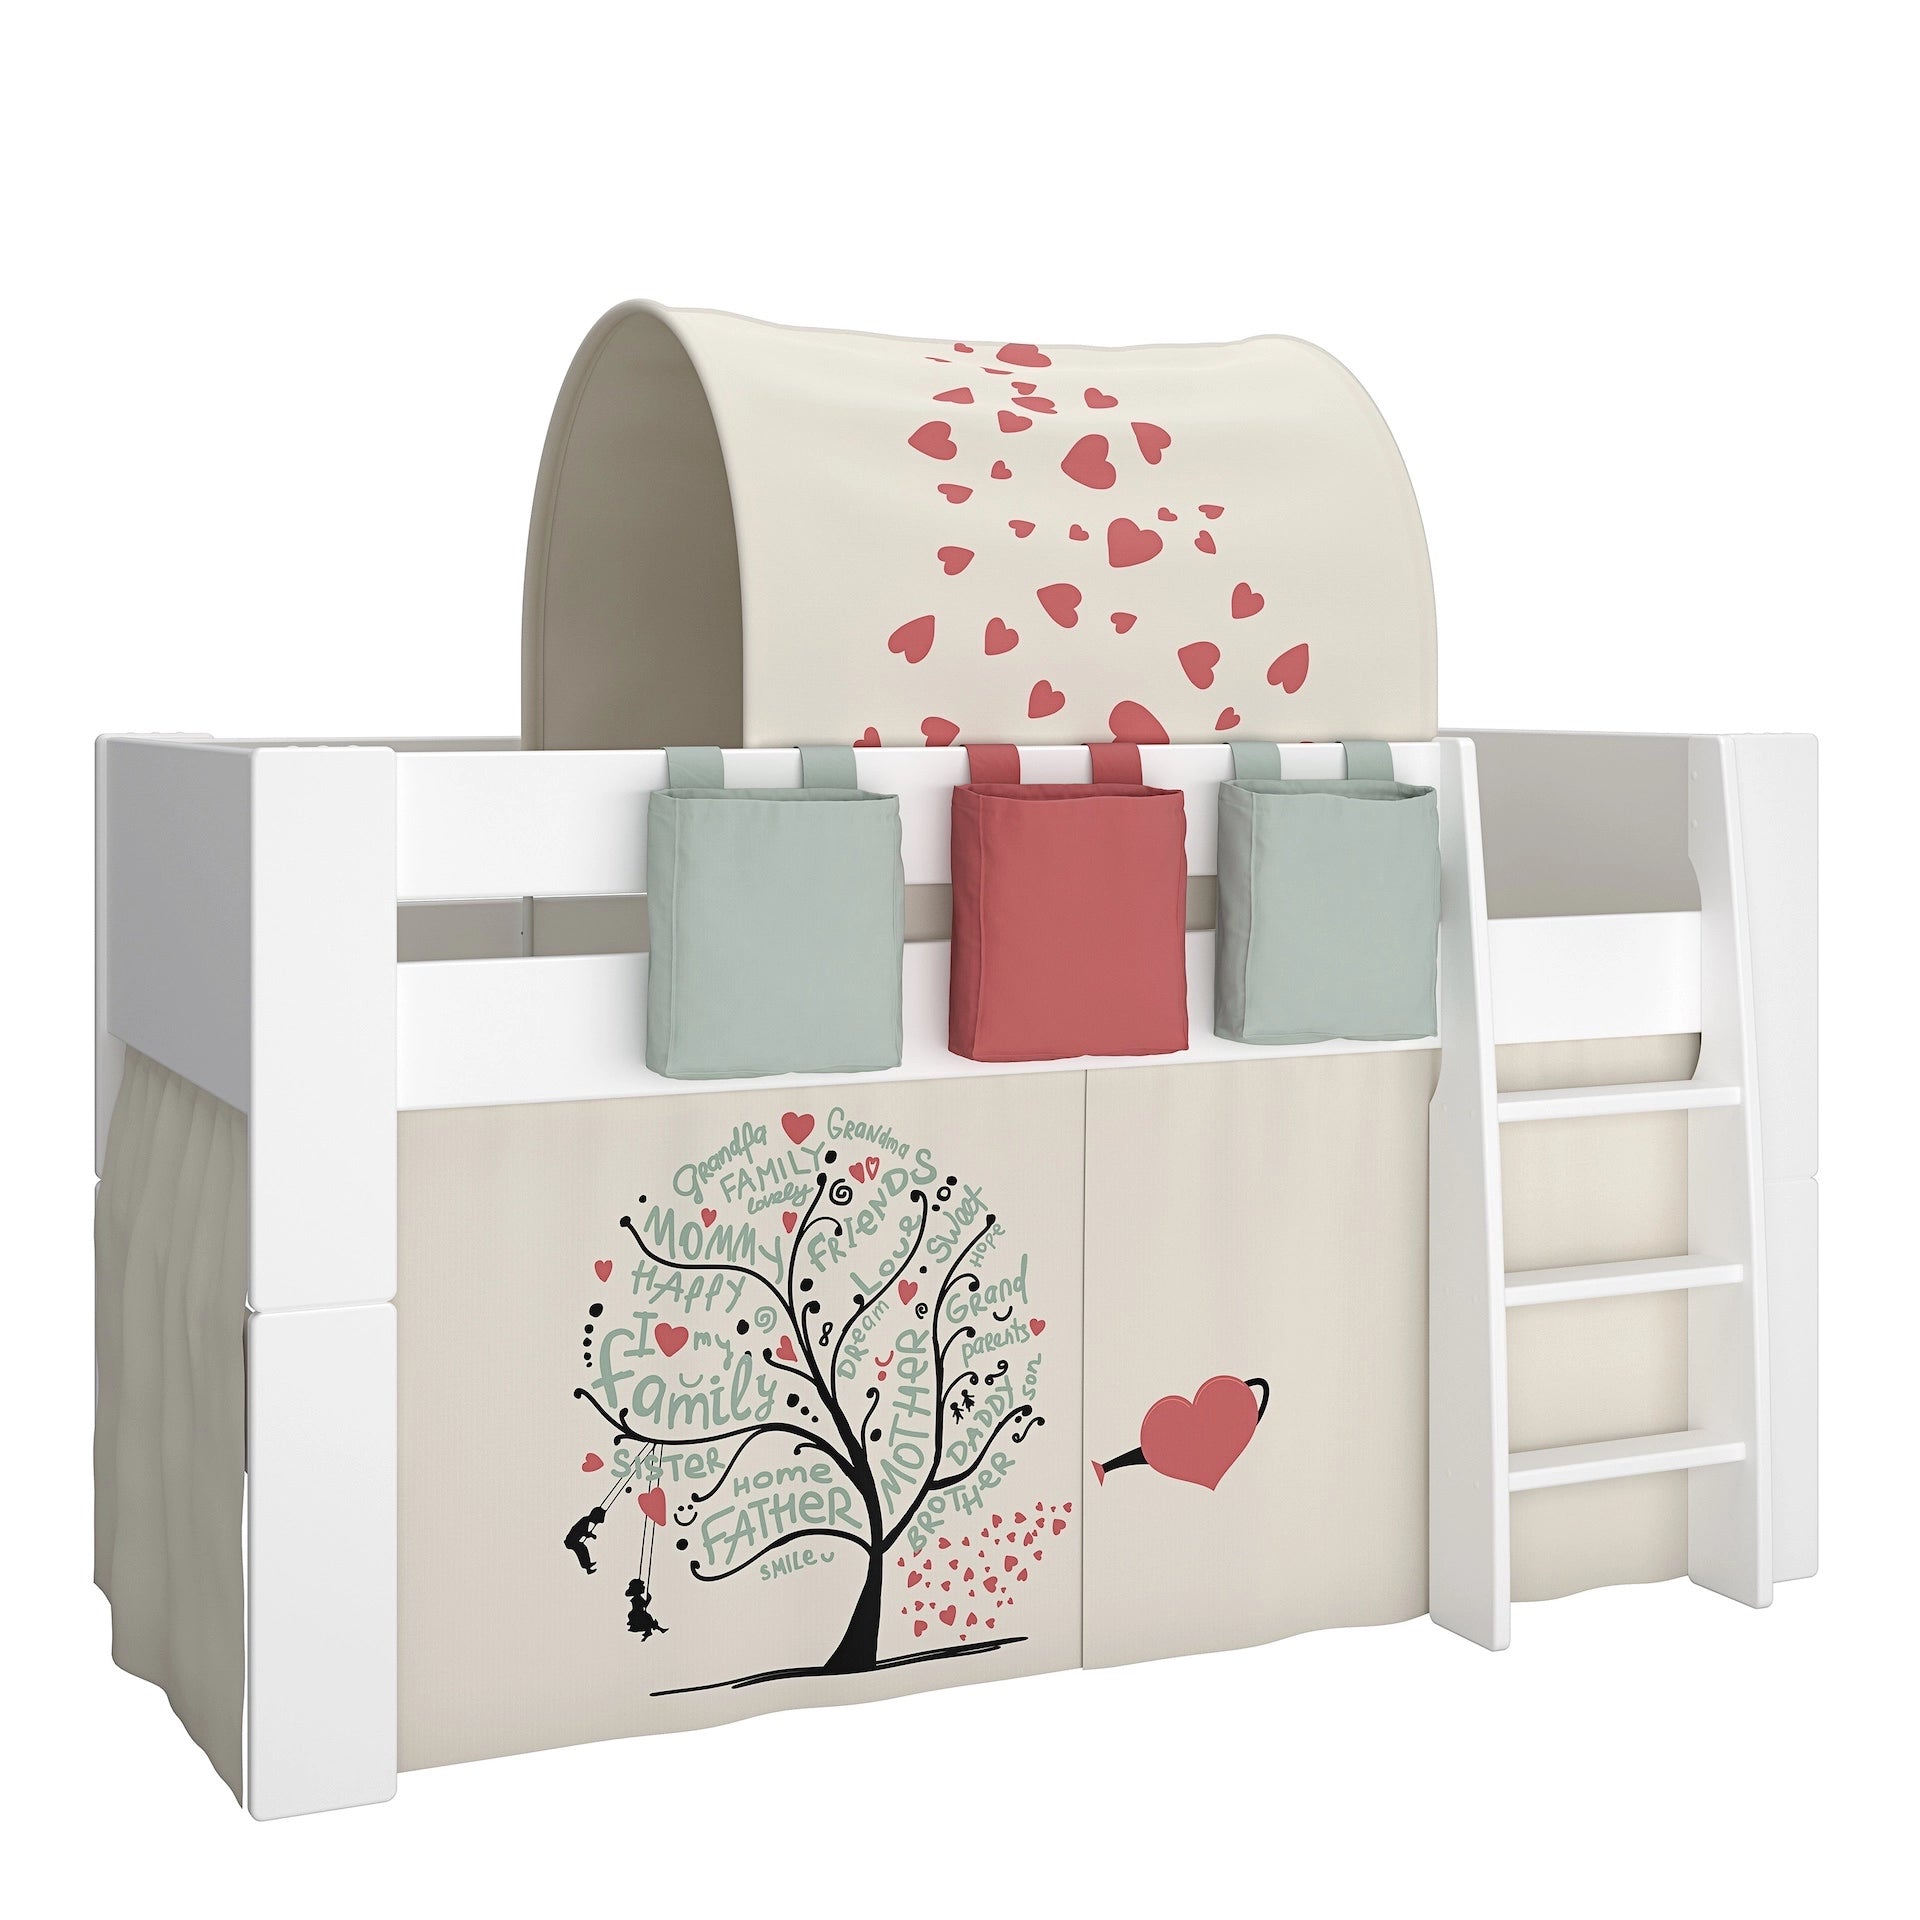 Furniture To Go Steens For Kids Mid Sleeper in Whitewash Grey Brown Lacquered, Includes - Tree of Life Tent + Tunnel + 2 Pockets in Green + 1 Pocket in Red